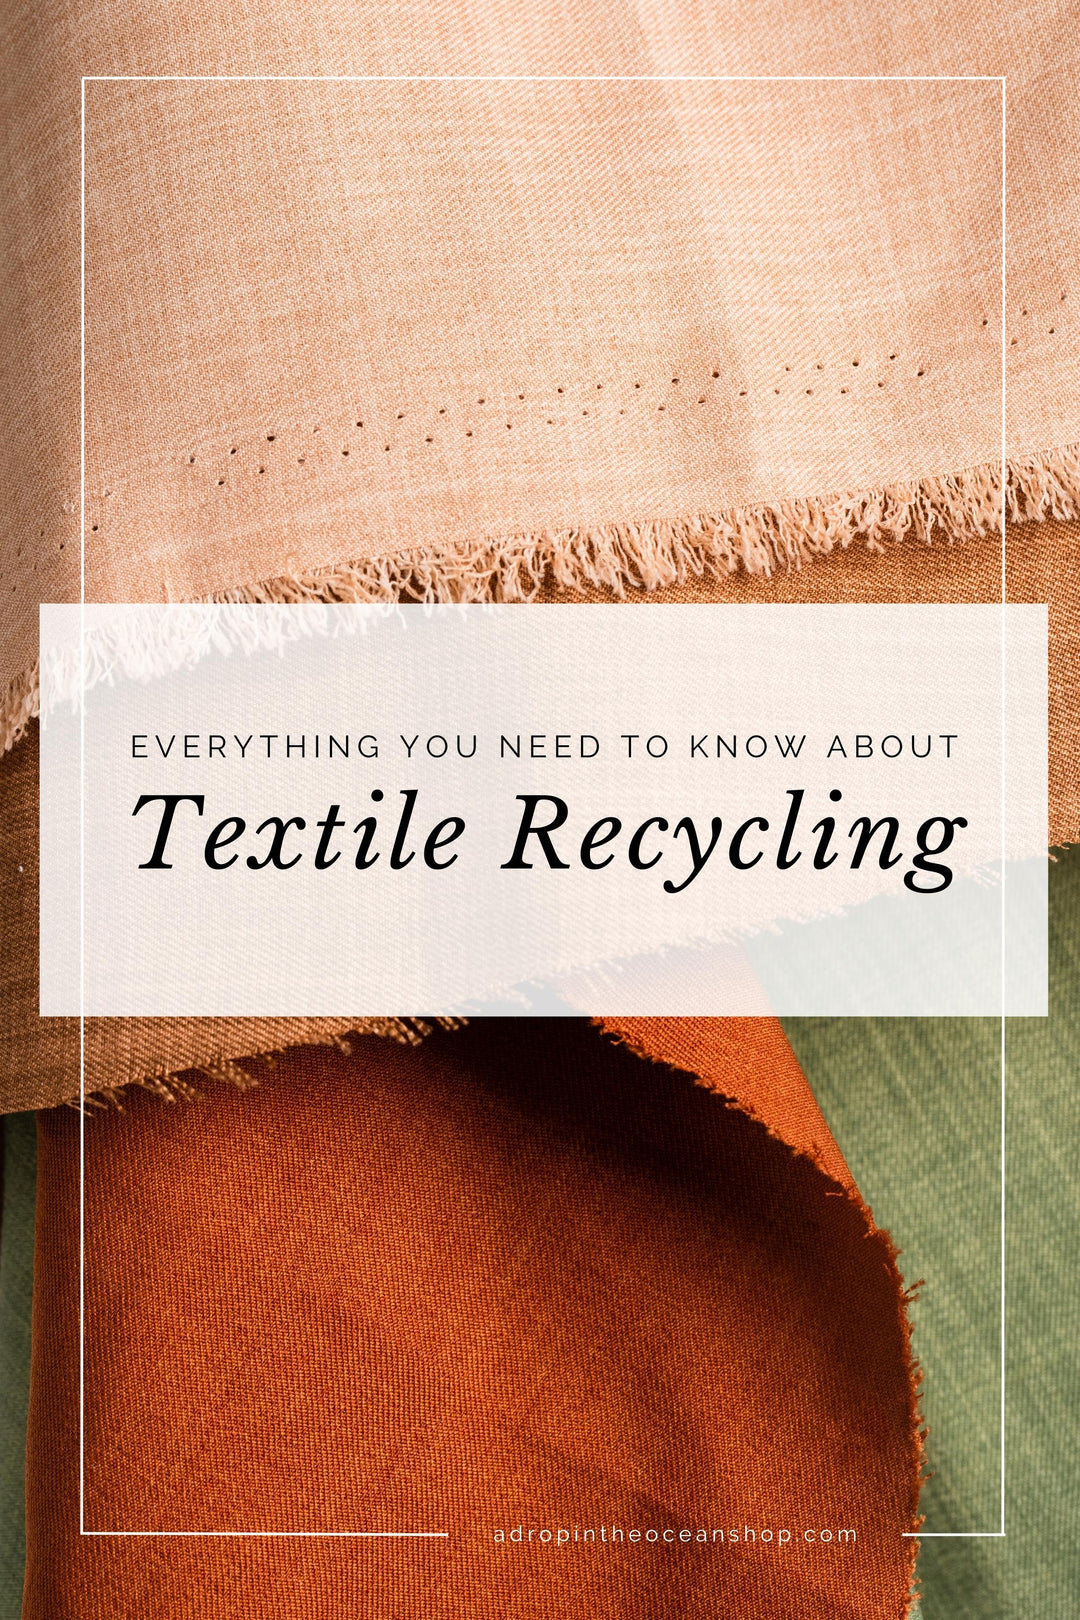 Is textile recycling greenwashing or an actual waste solution? Here's everything you need to know.